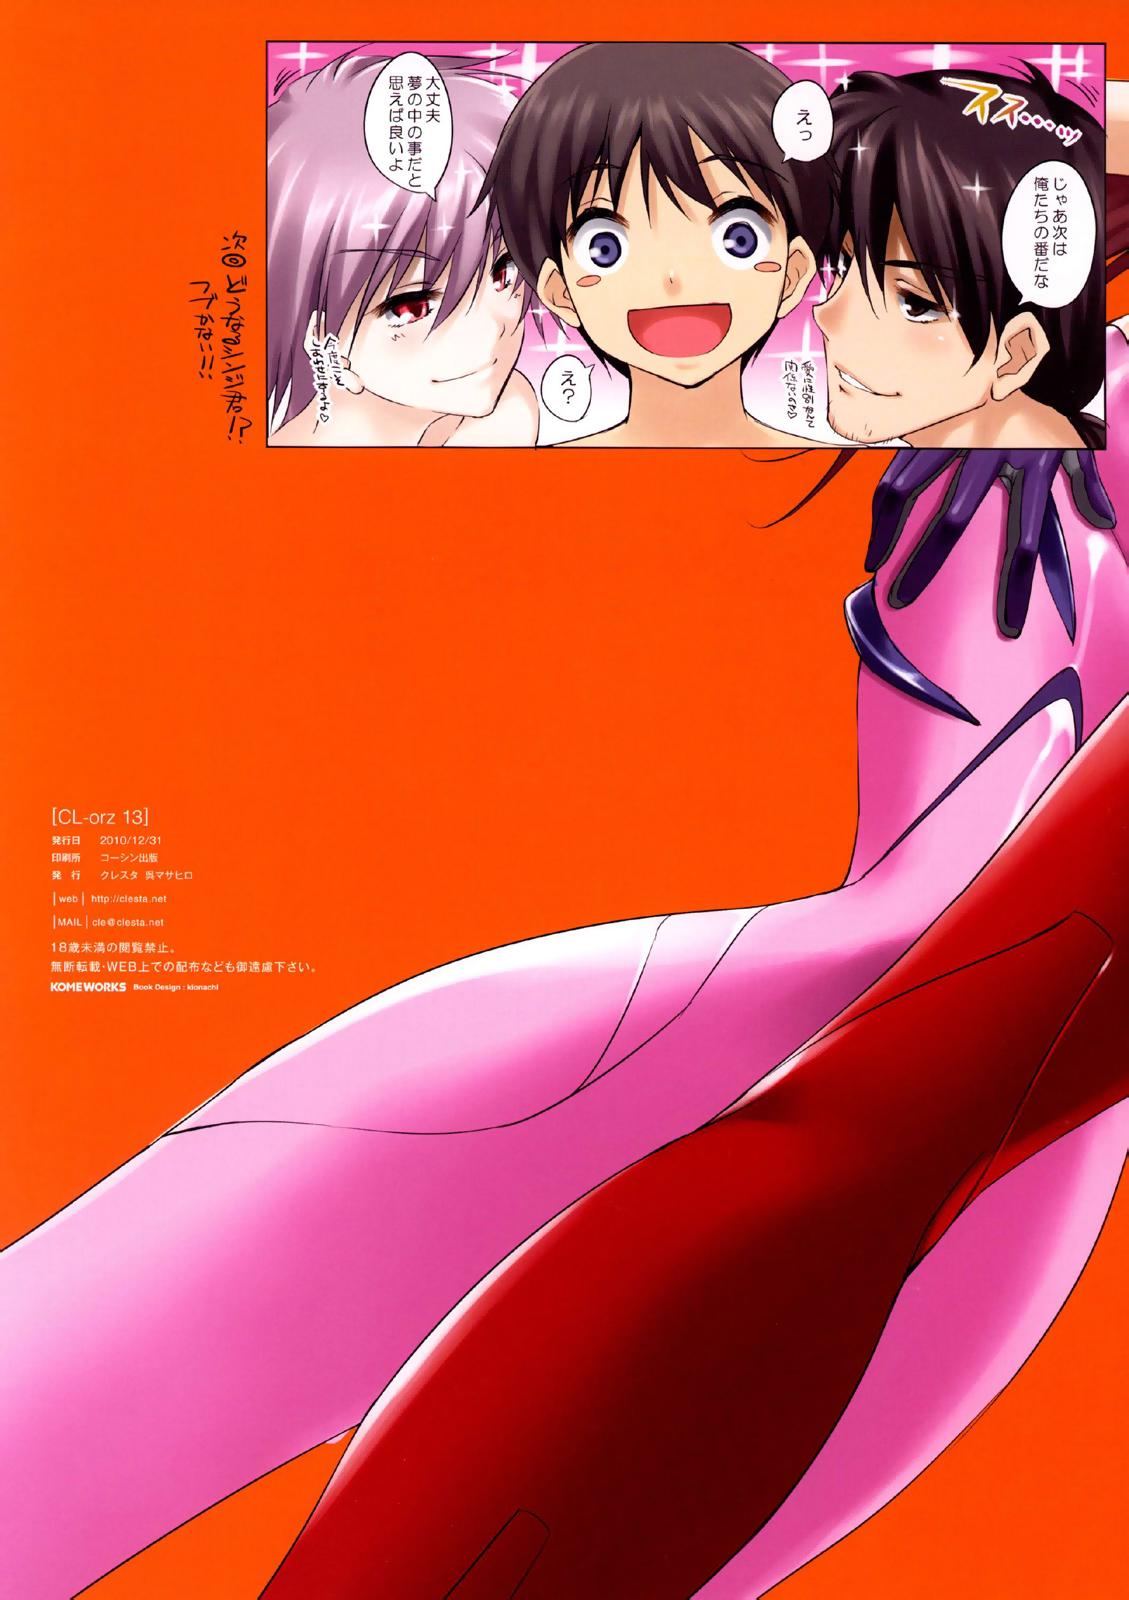 (C79) [clesta (Cle Masahiro)] CL-orz: 13 - YOU CAN (NOT) ADVANCE. (Rebuild of Evangelion) [Decensored] 14